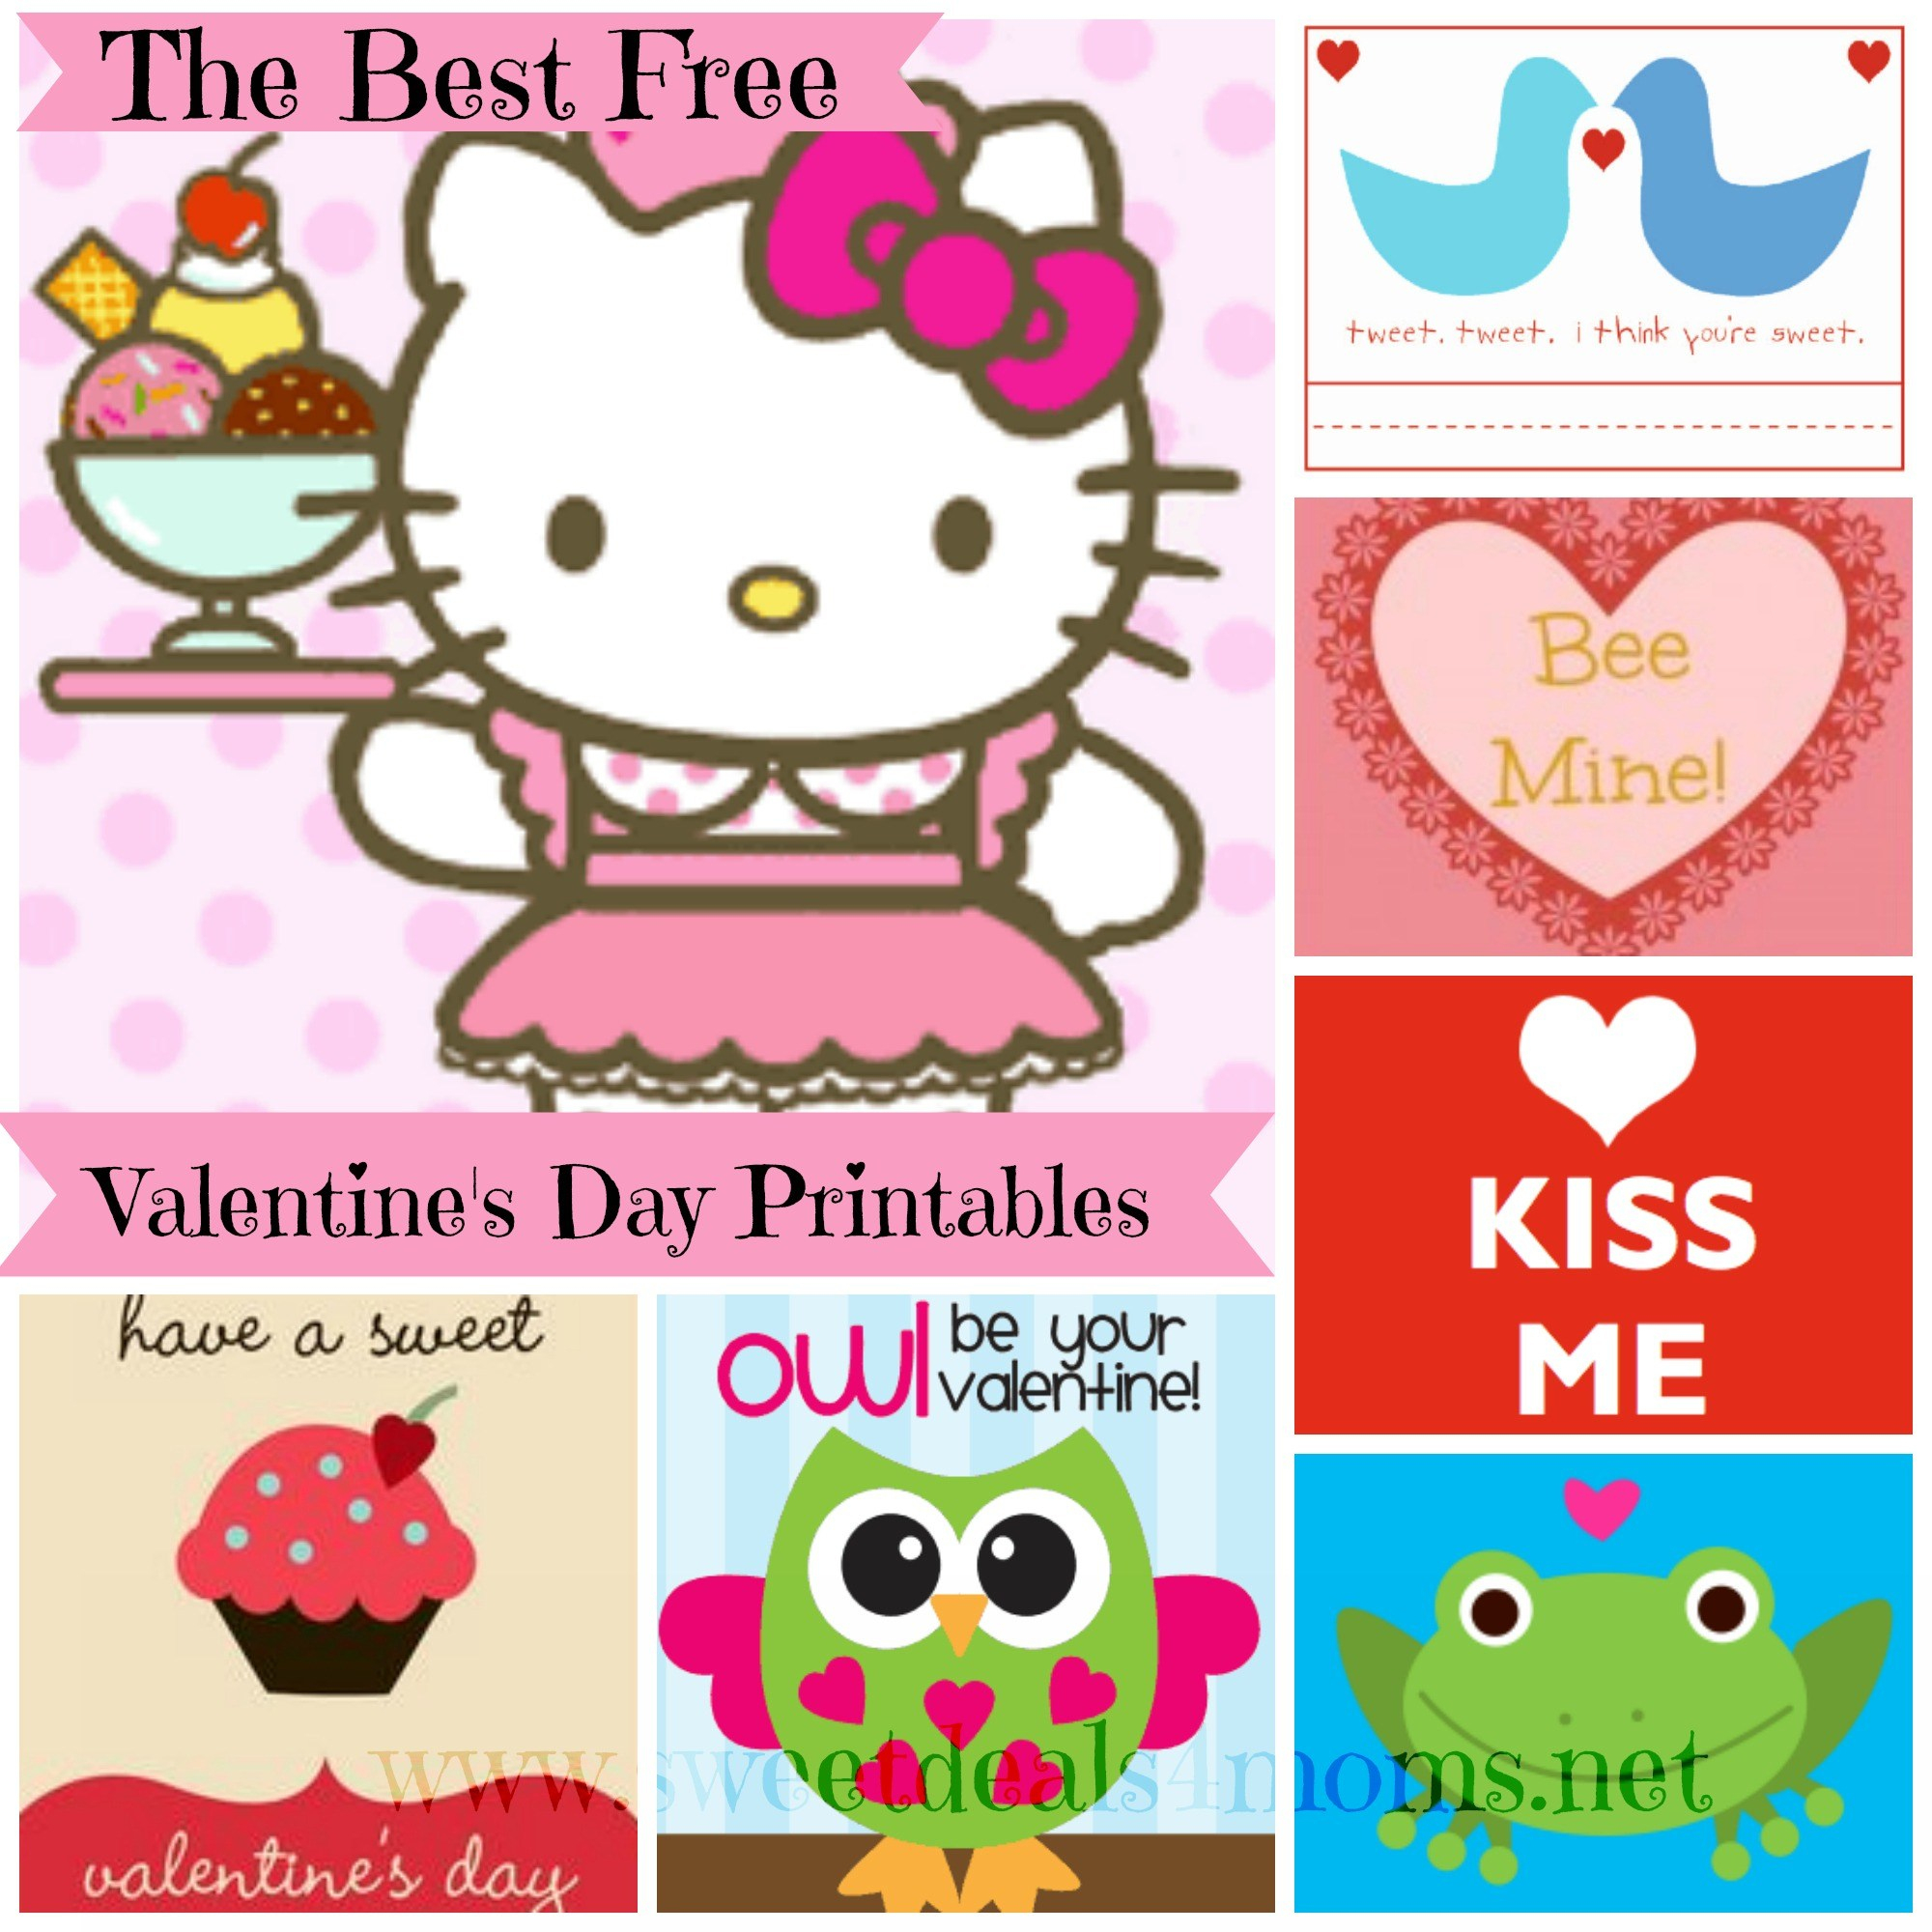 Free Printable Valentines Day Card Roundup - Sweet Deals 4 Moms - Free Printable Valentines Day Cards For Mom And Dad